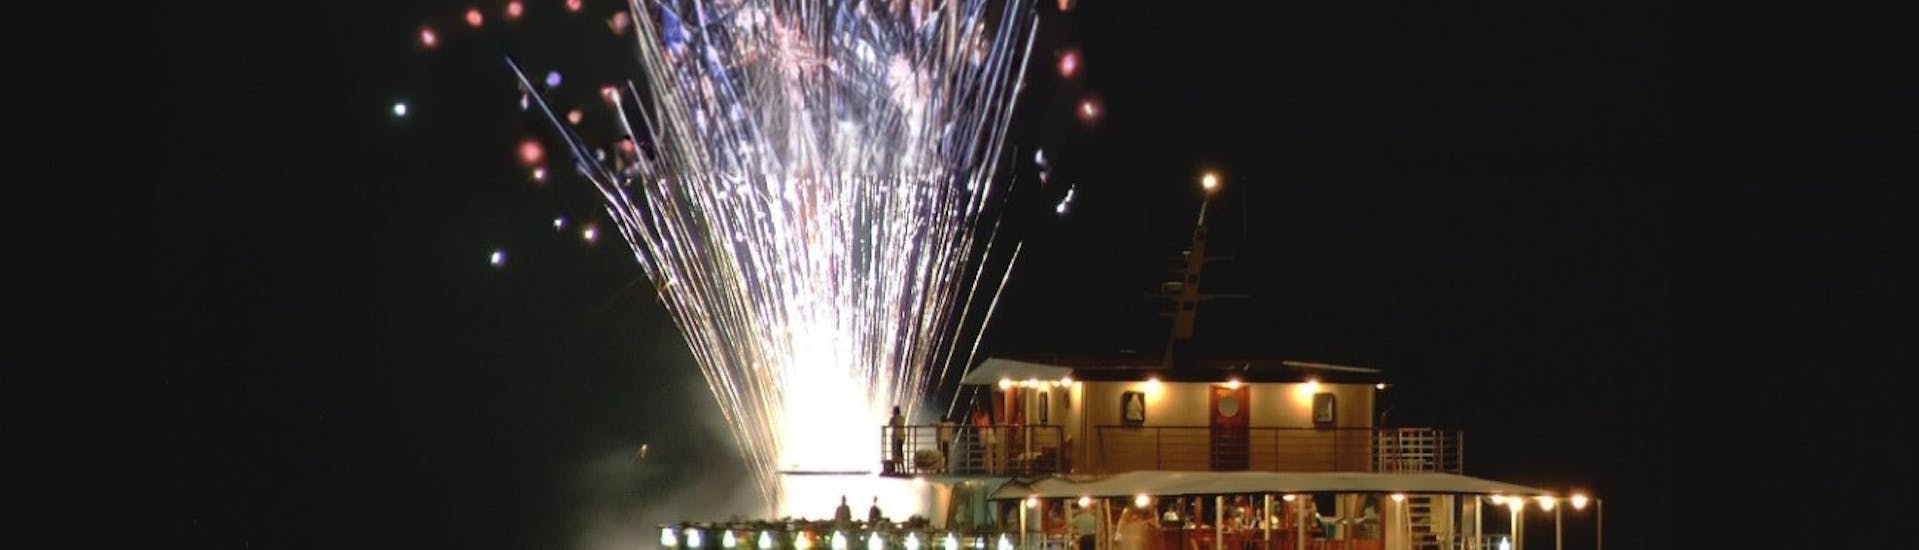 Boat Trip to Rikkos Beach with Buffet, Live Music & Fireworks - For Families.